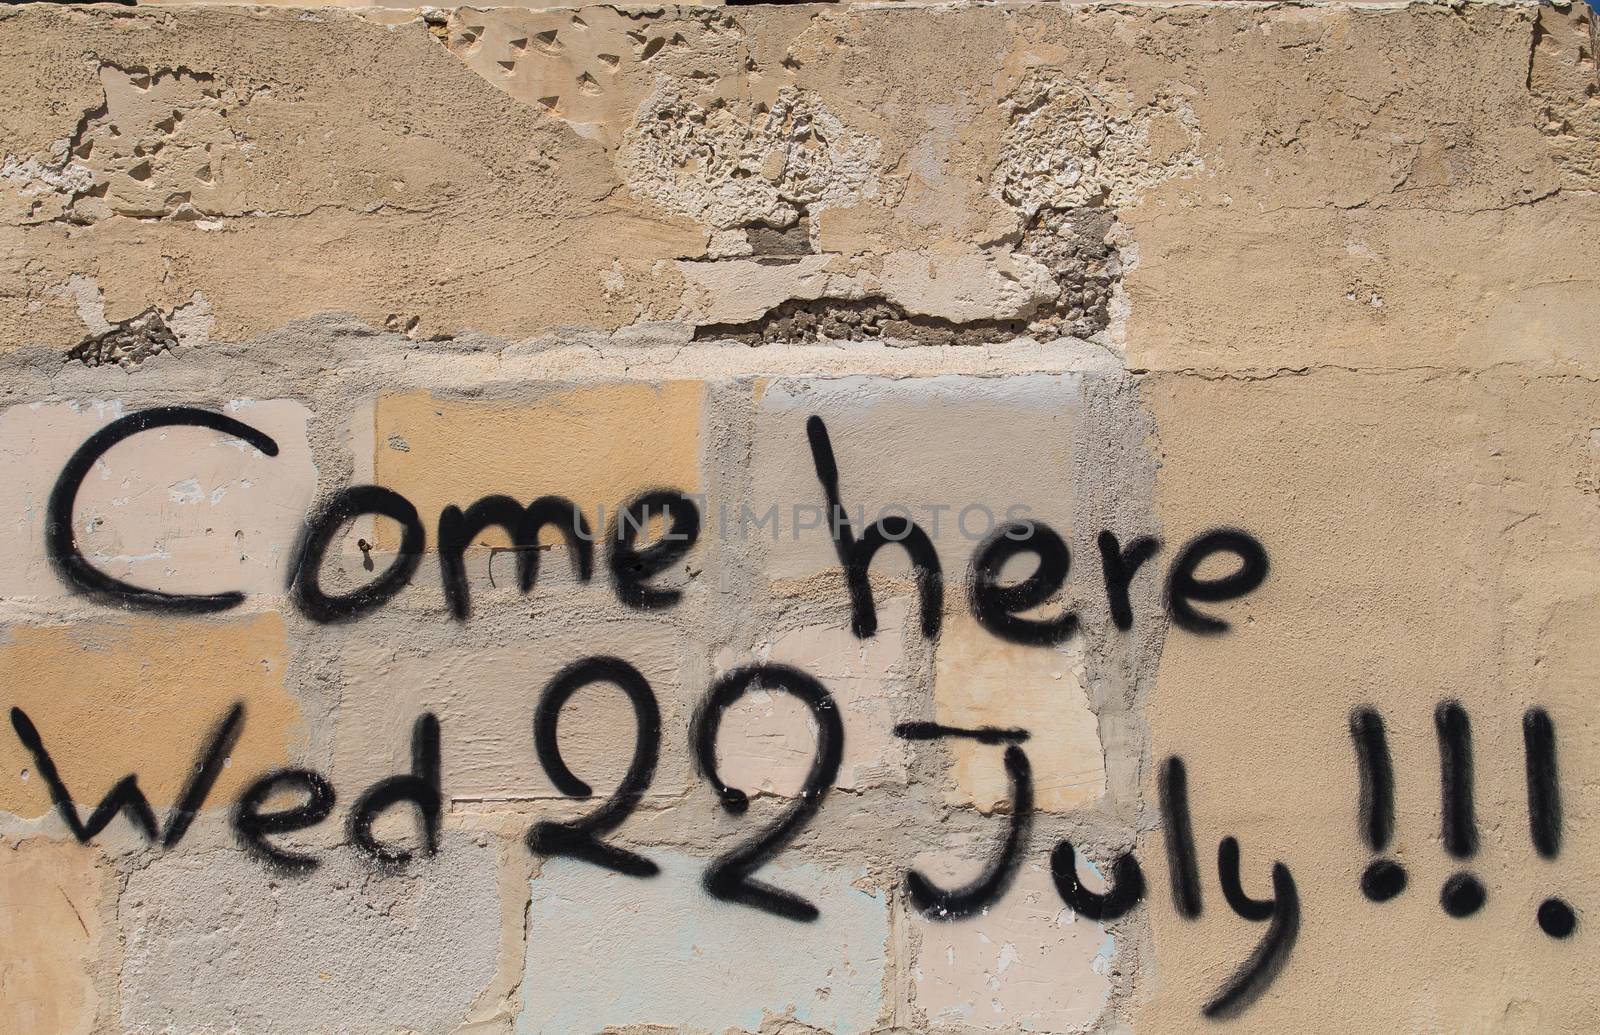 Graffiti message come here in July by YassminPhoto